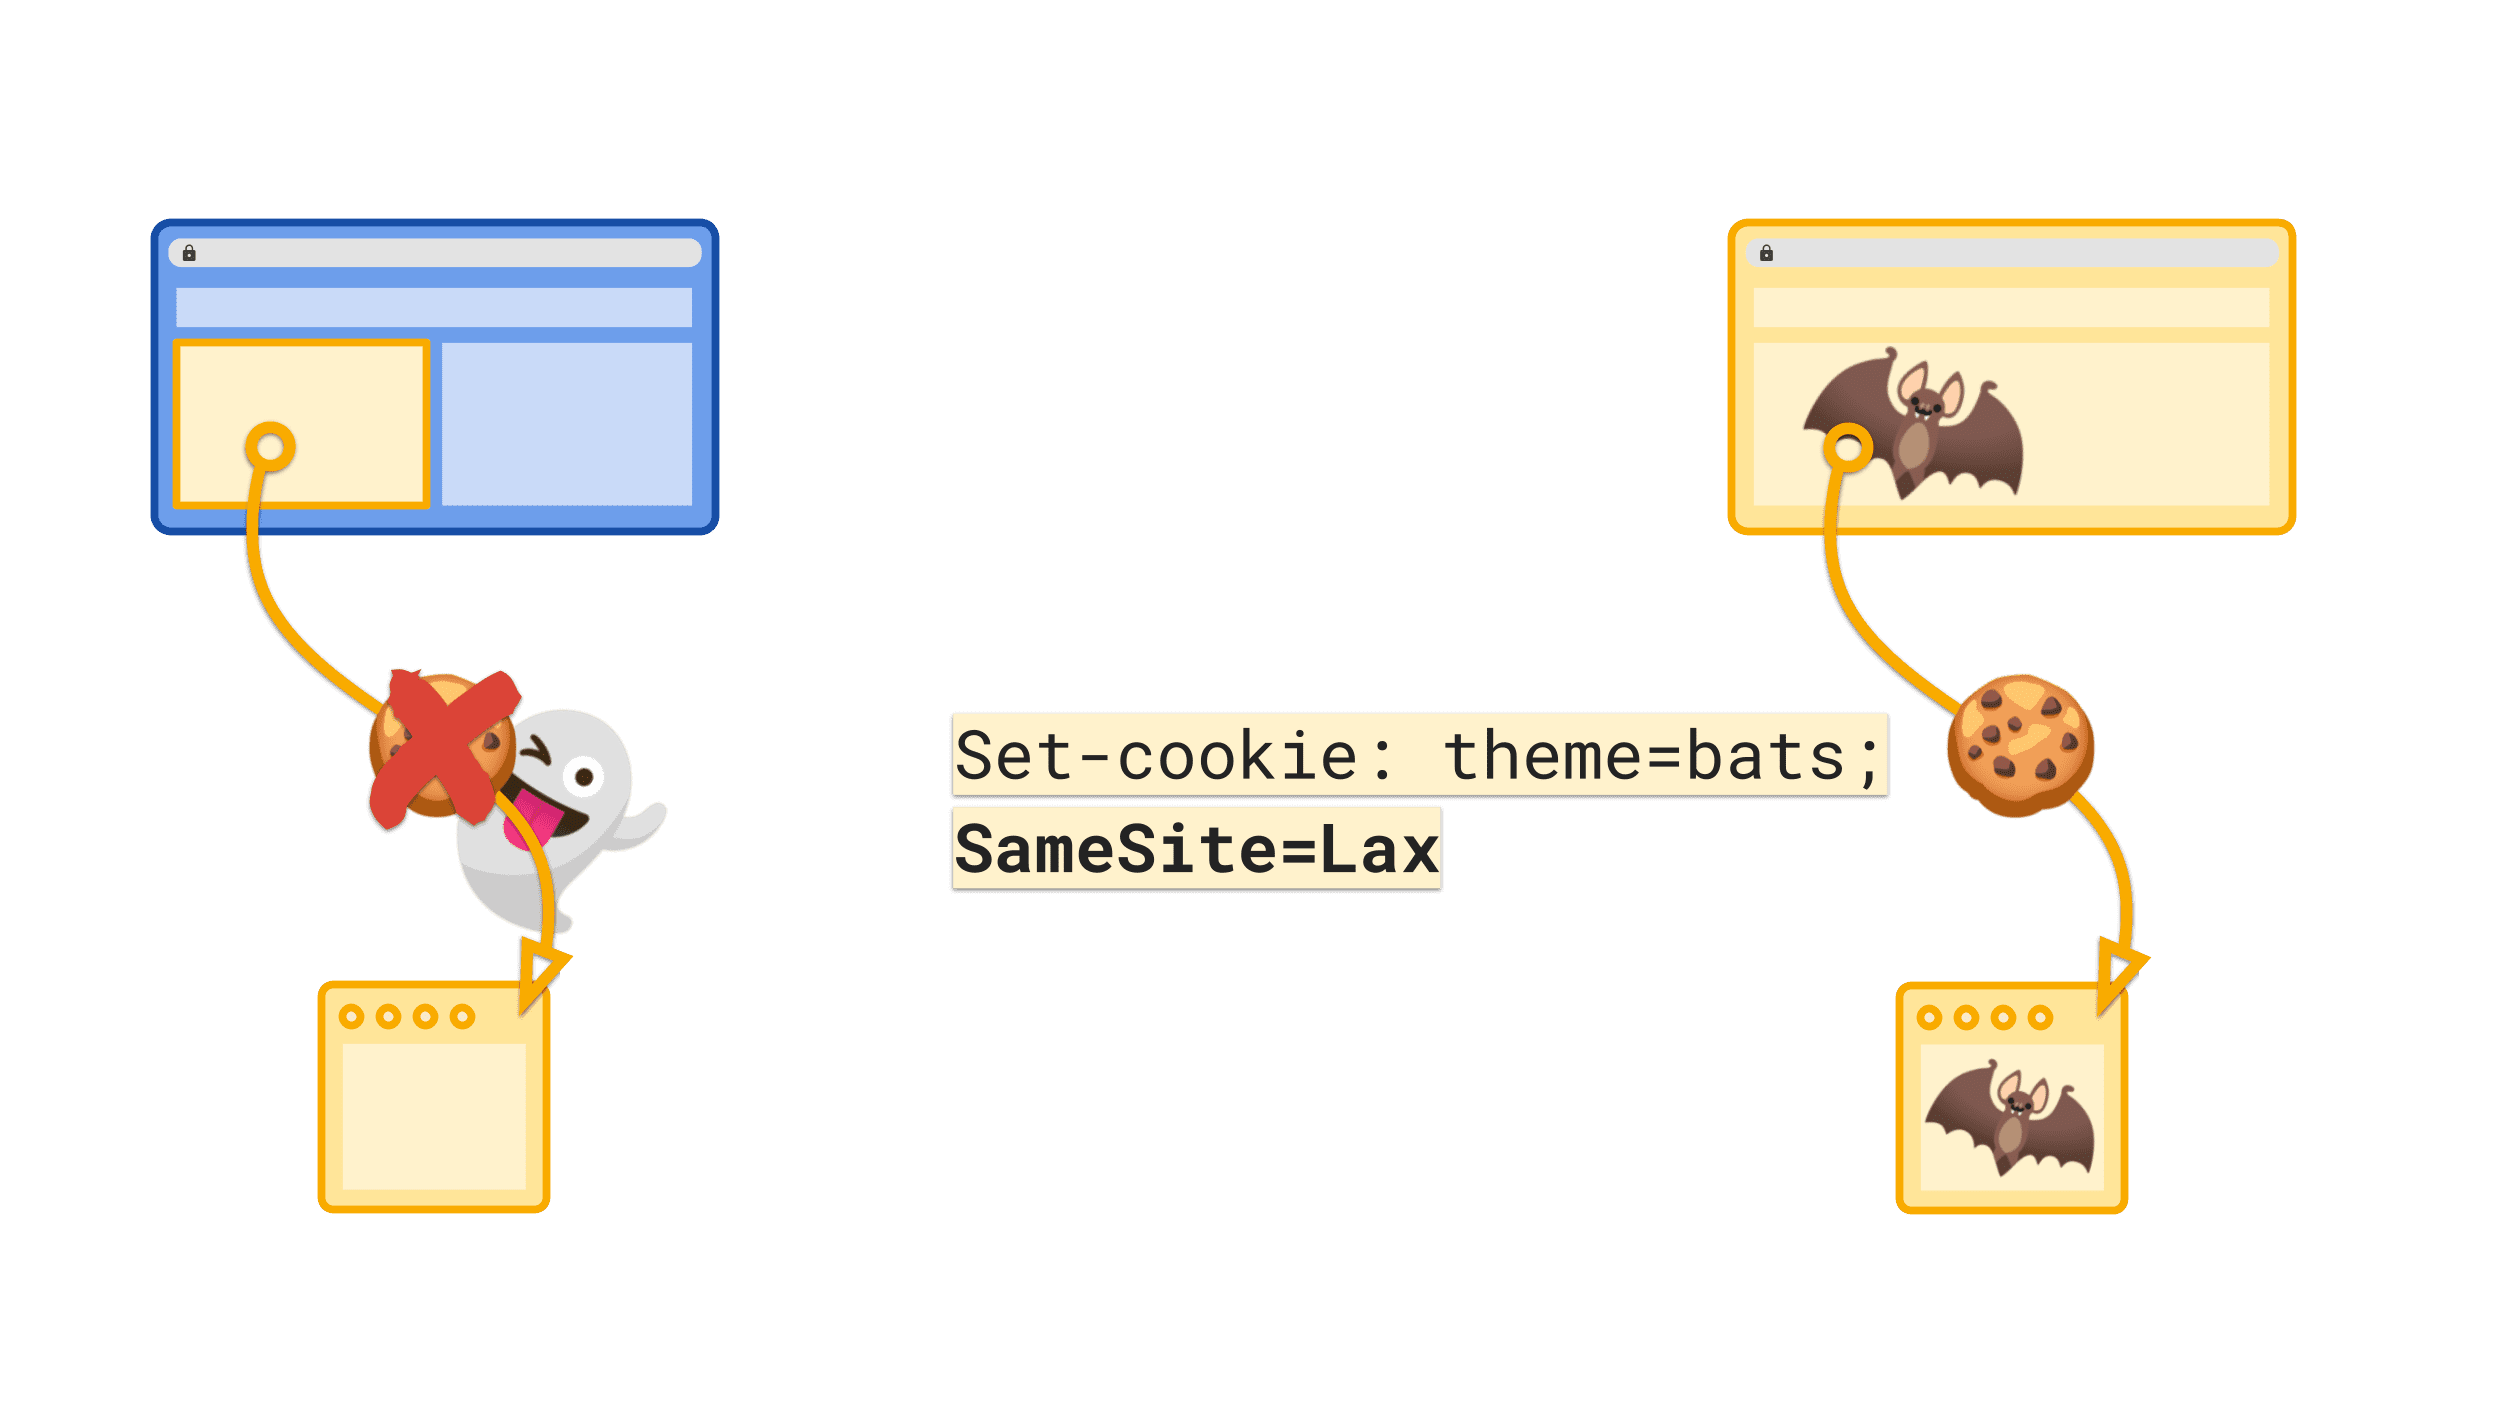 The default SameSite=Lax value stops a cookie being sent in a third-party context